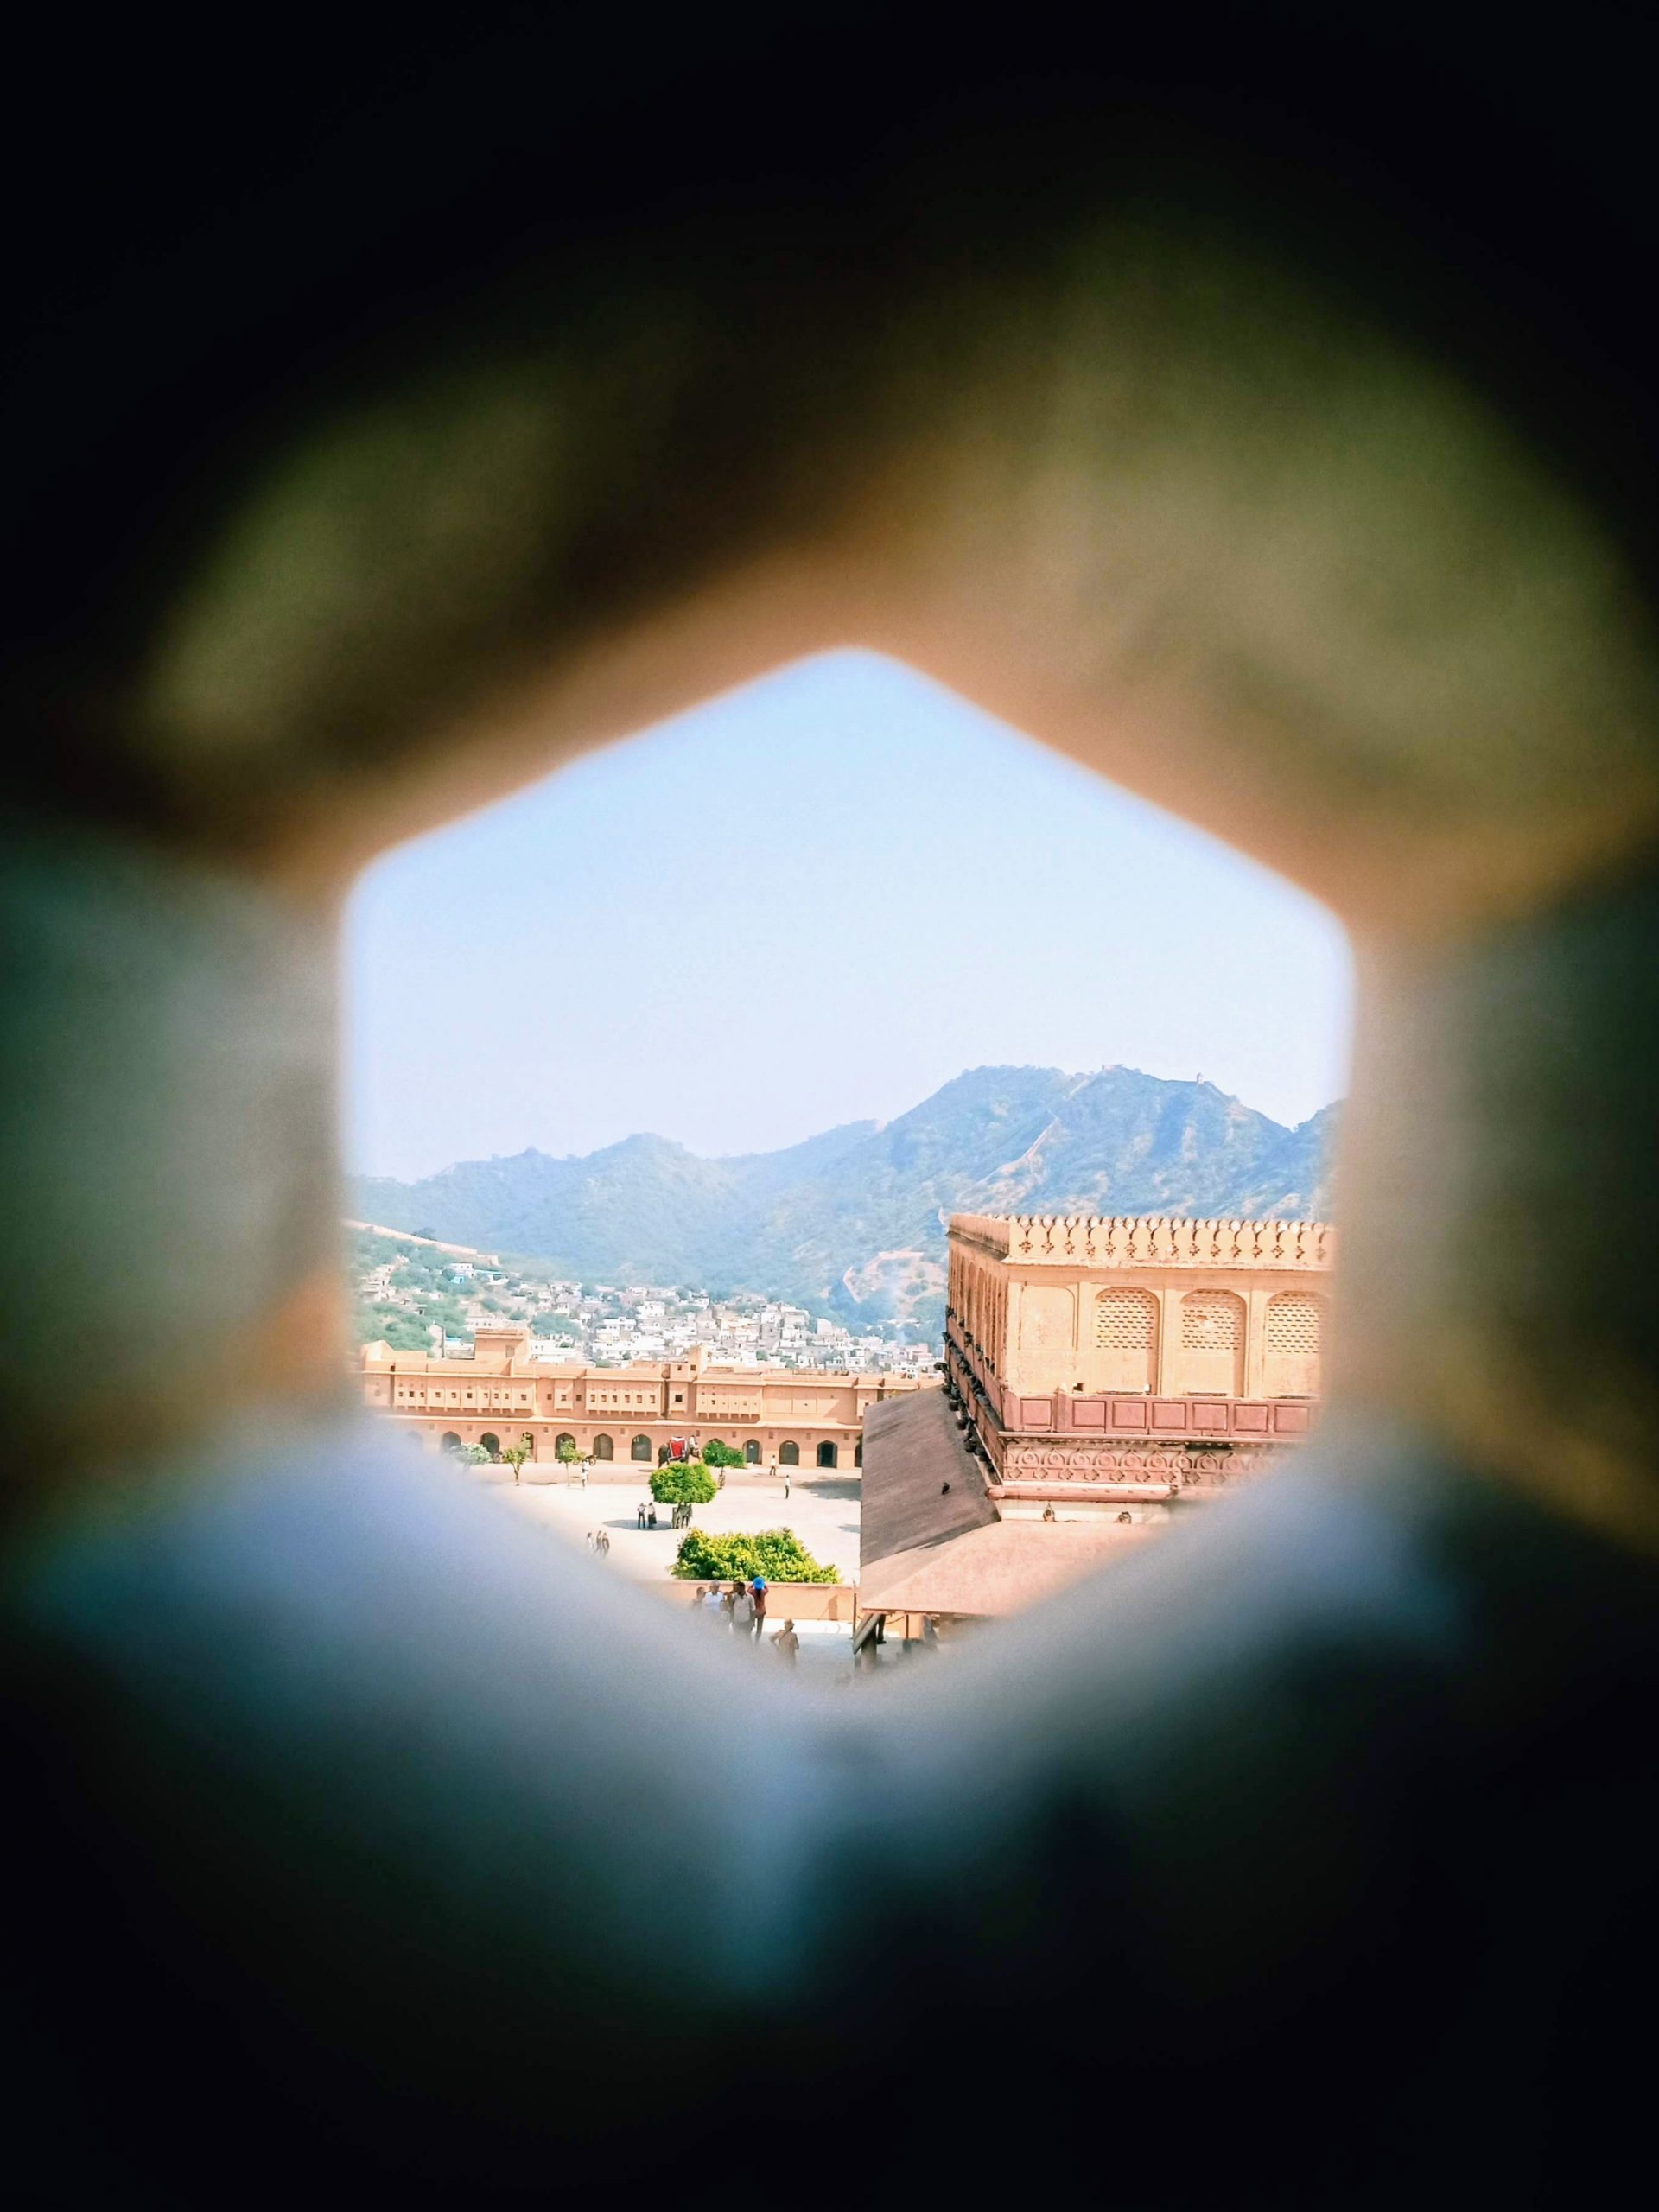 a Fort view through window in Rajasthan